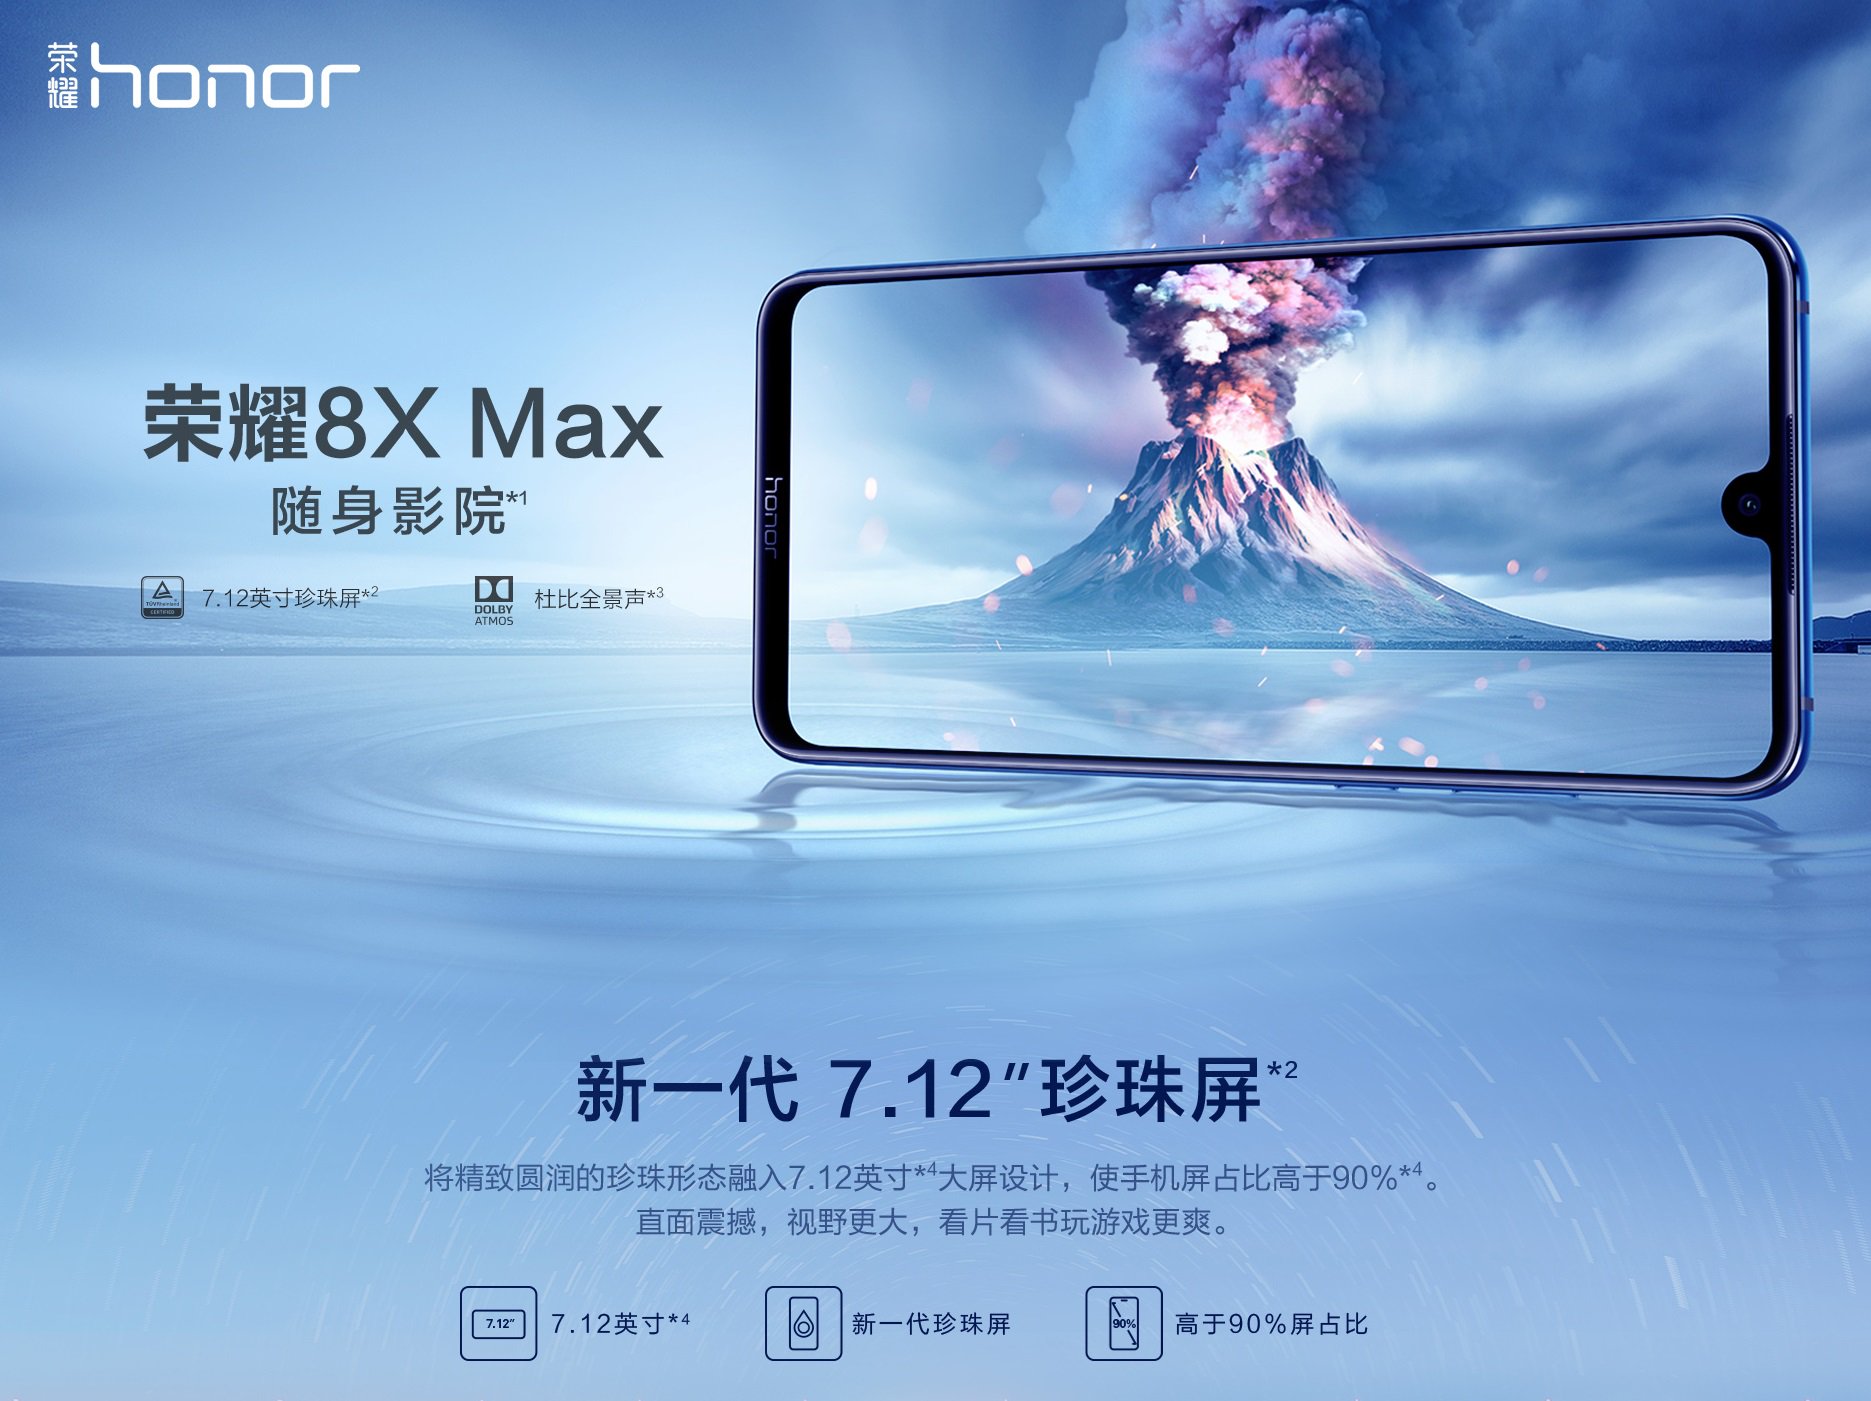 Honor-8X-Max-featured.jpg